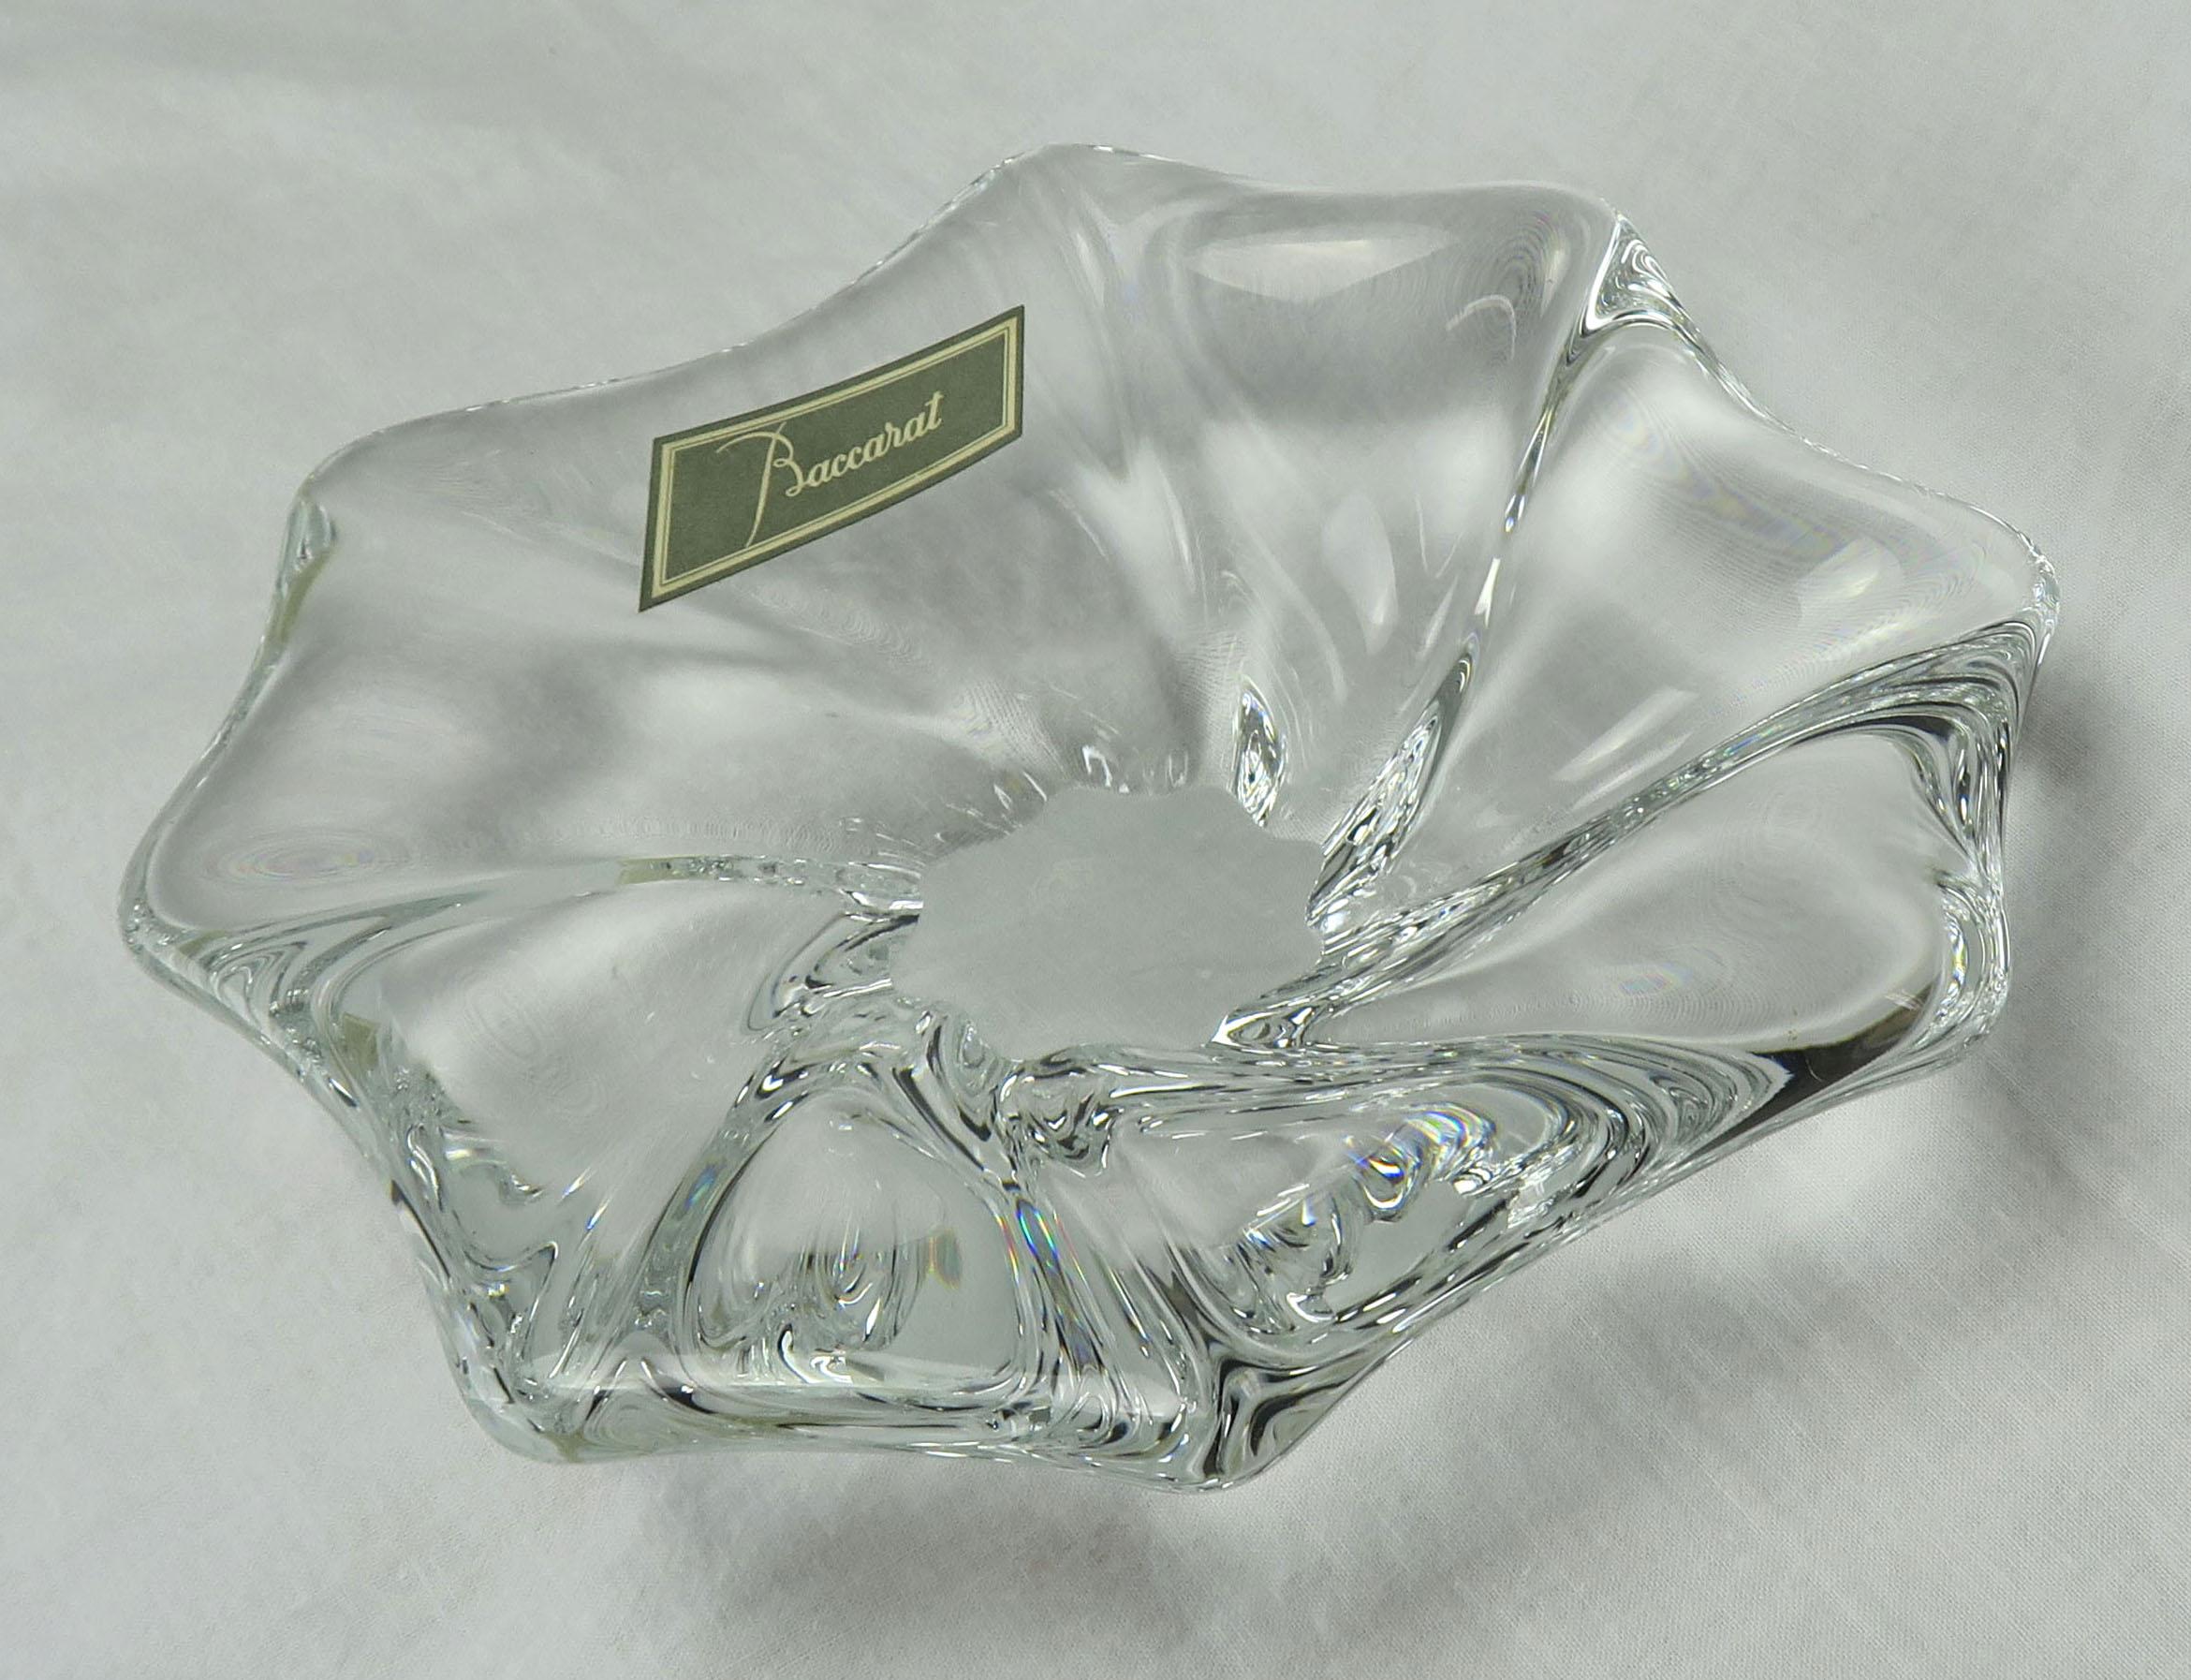 baccarat dishes